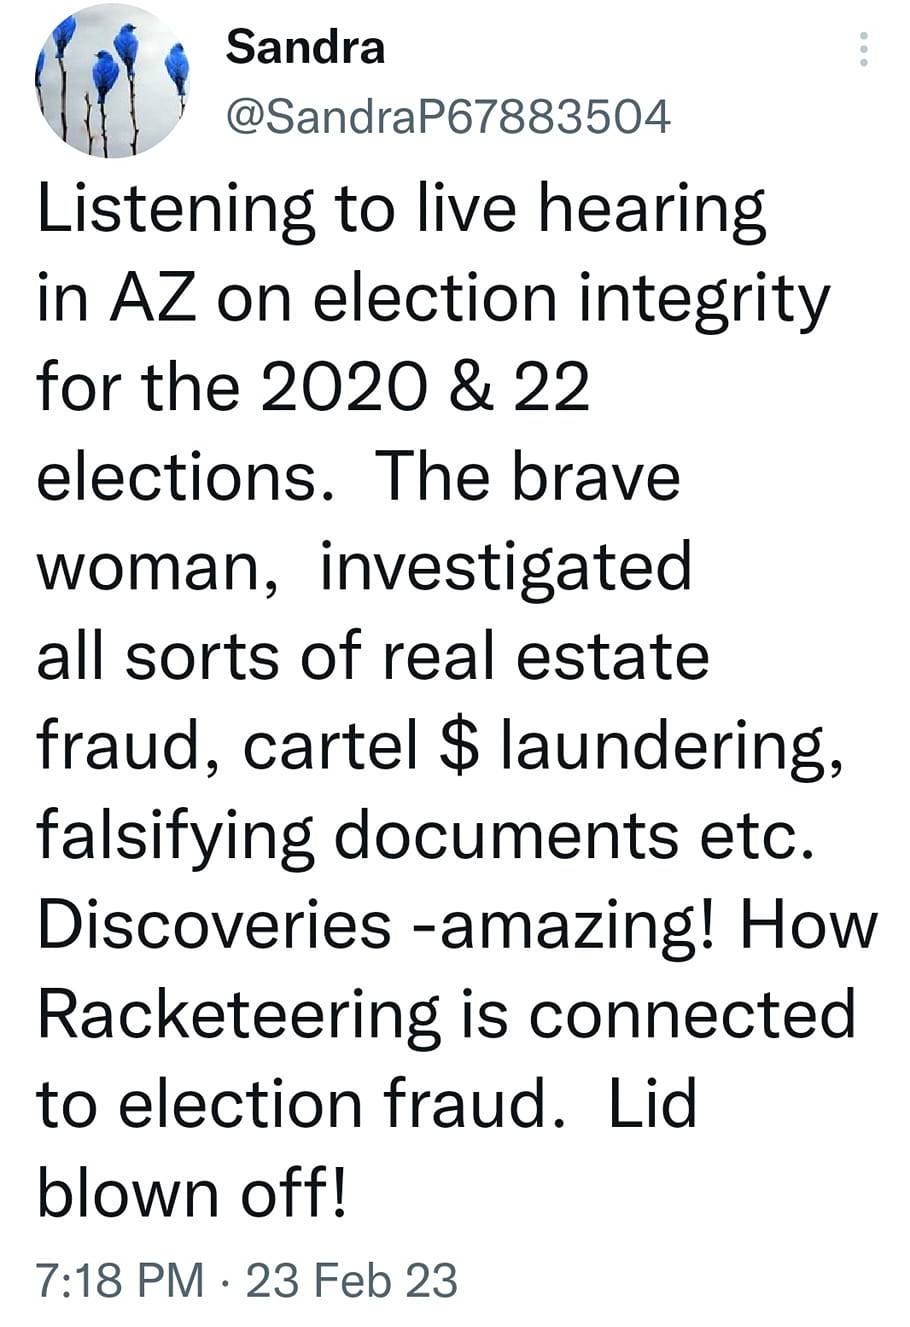 May be an image of ‎text that says '‎7:24 MMMO UR: النه 45% Tweet t7 You Retweeted Sandra @SandraP67883504 Listening to live hearing in AZ on election integrity for the 2020 & 22 elections. The brave woman, investigated all sorts of real estate fraud, cartel $ laundering, falsifying documents etc. Discoveries -amazing! How Racketeering is connected to election fraud. Lid blown off! 7:18 PM 23 Feb 23 3 Views 1 Retweet Tweet your reply‎'‎